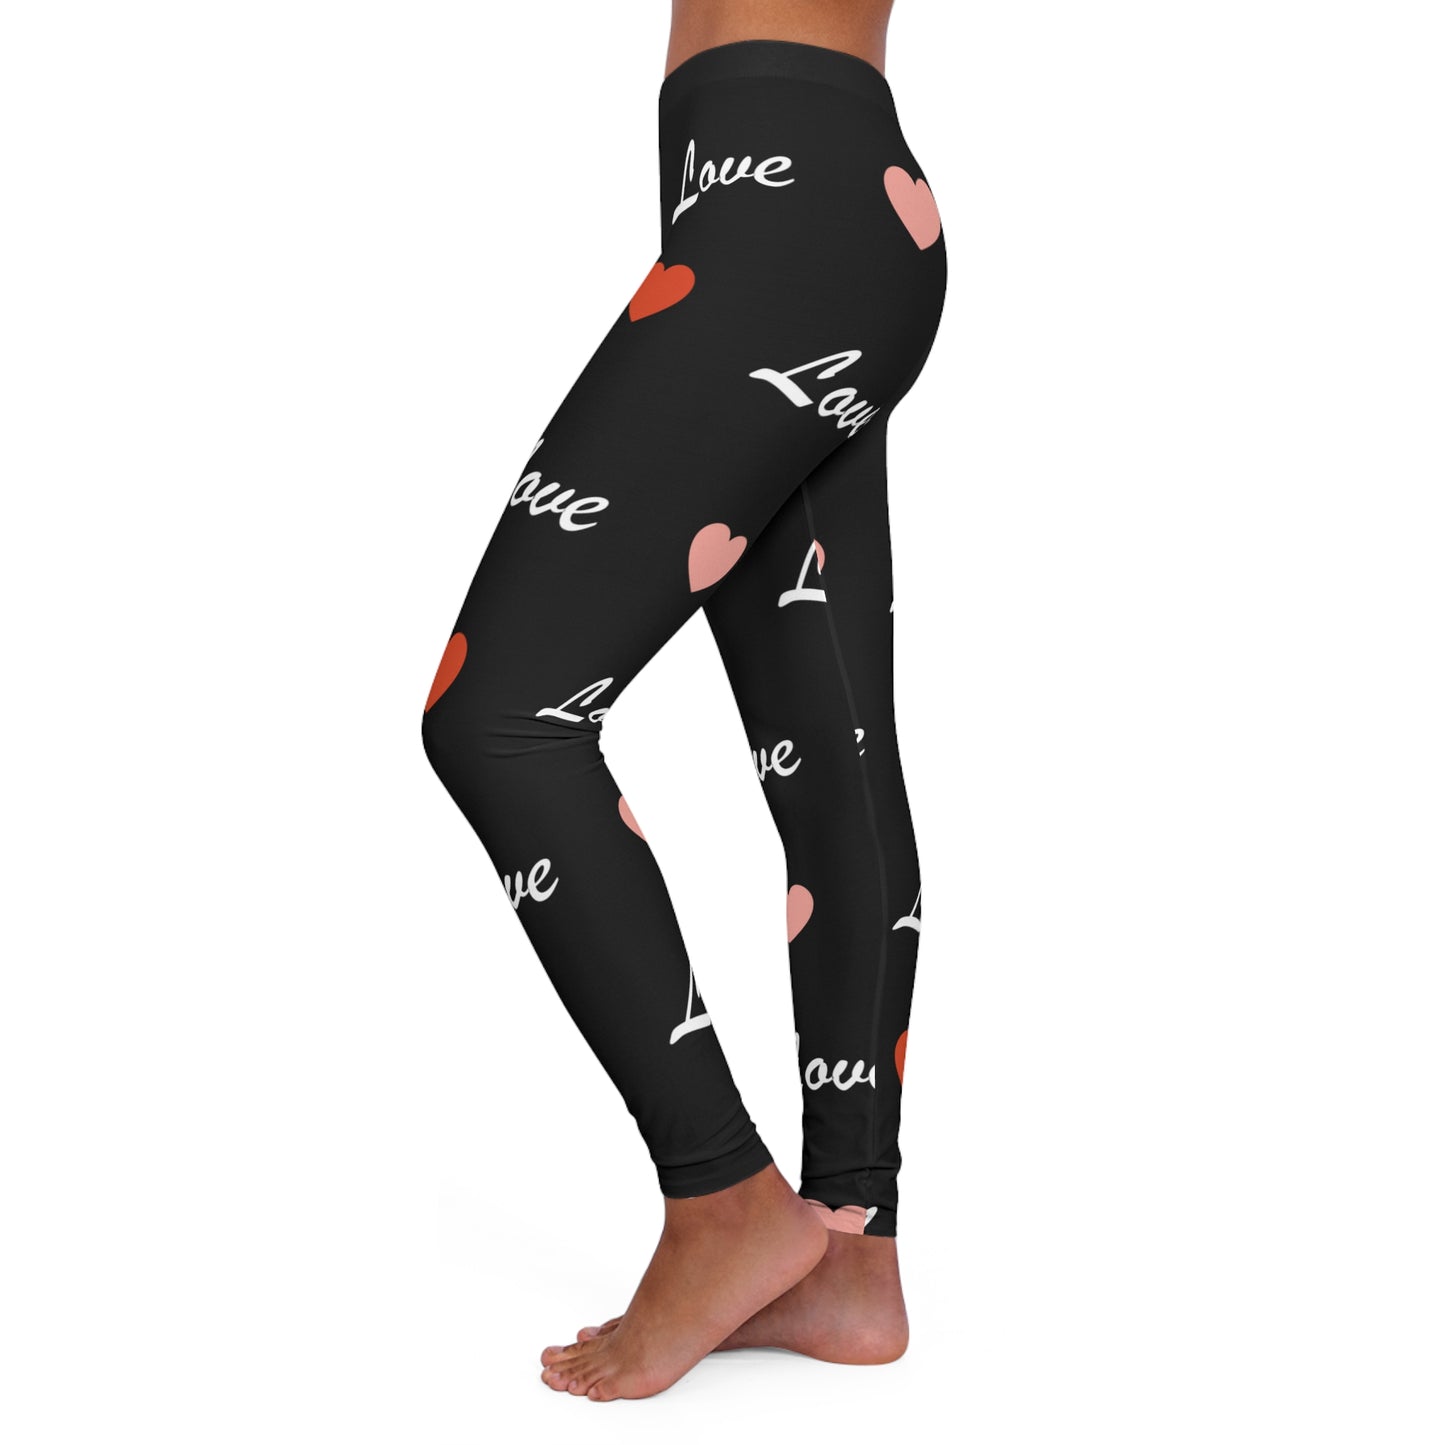 Love Heart Leggings: Expressions of Affection in Style